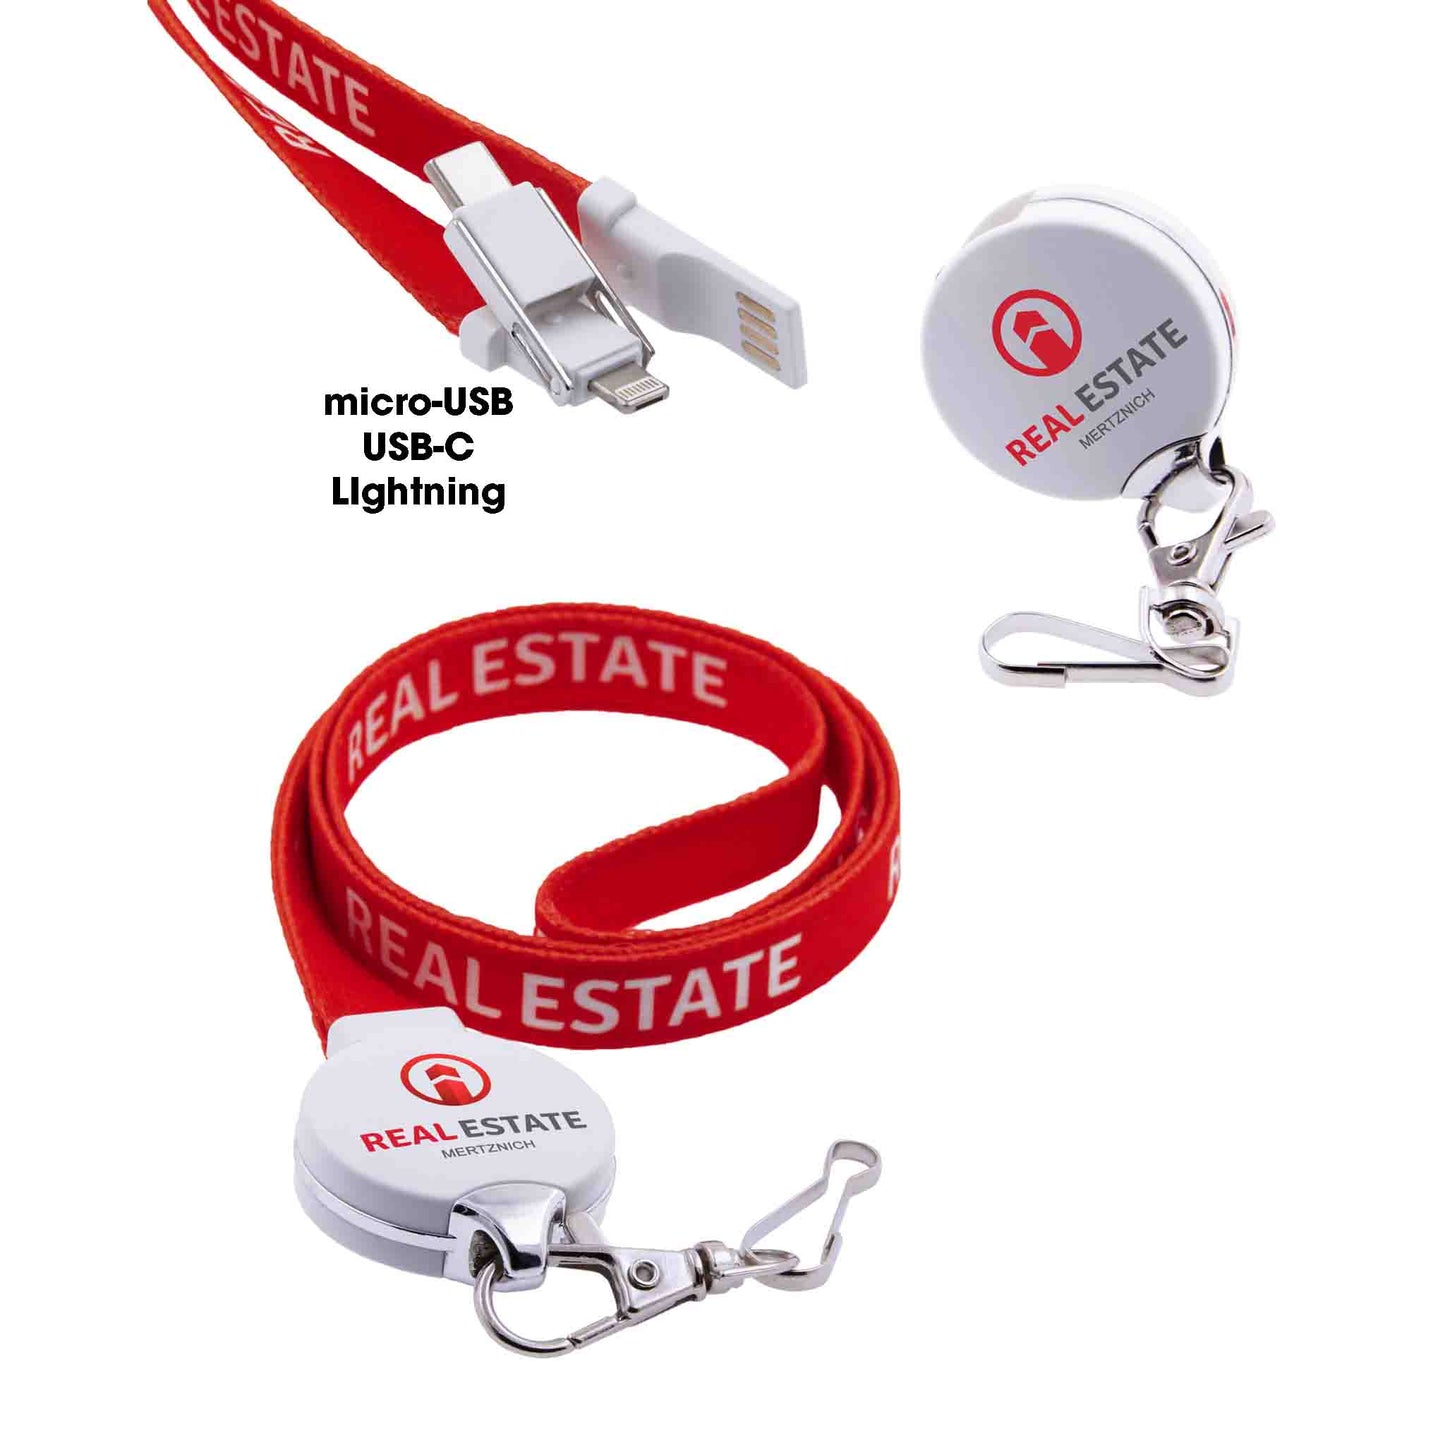 MagCable 3in1 "lanyard deluxe" USB cable